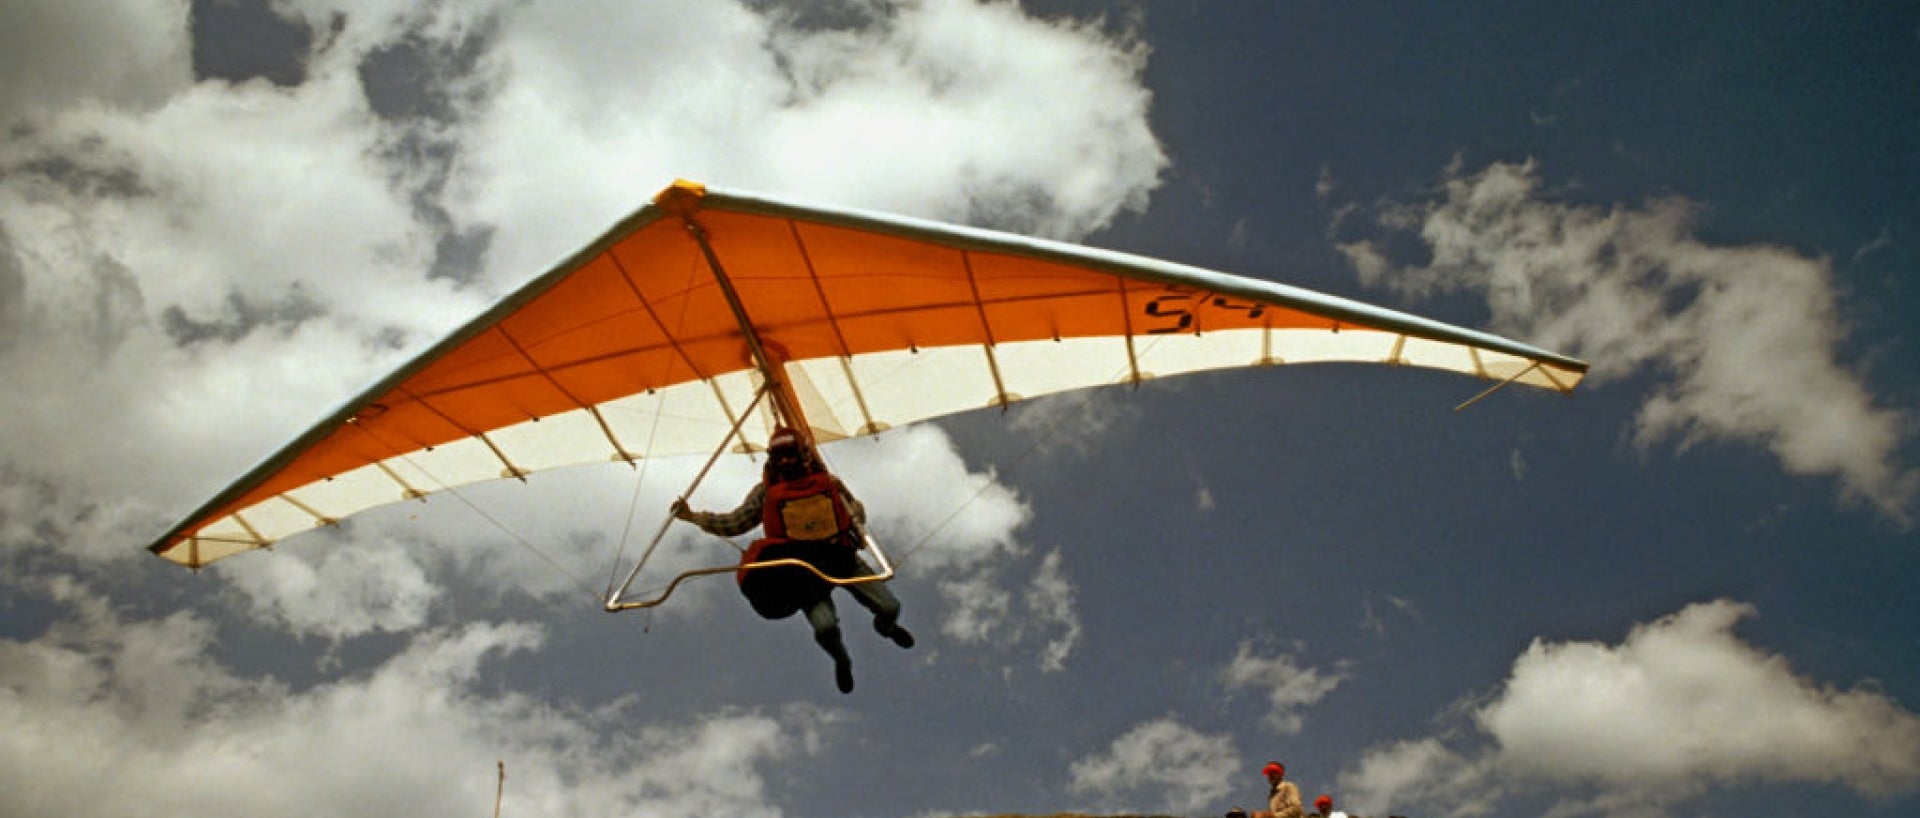 Photo of a hang glider in India